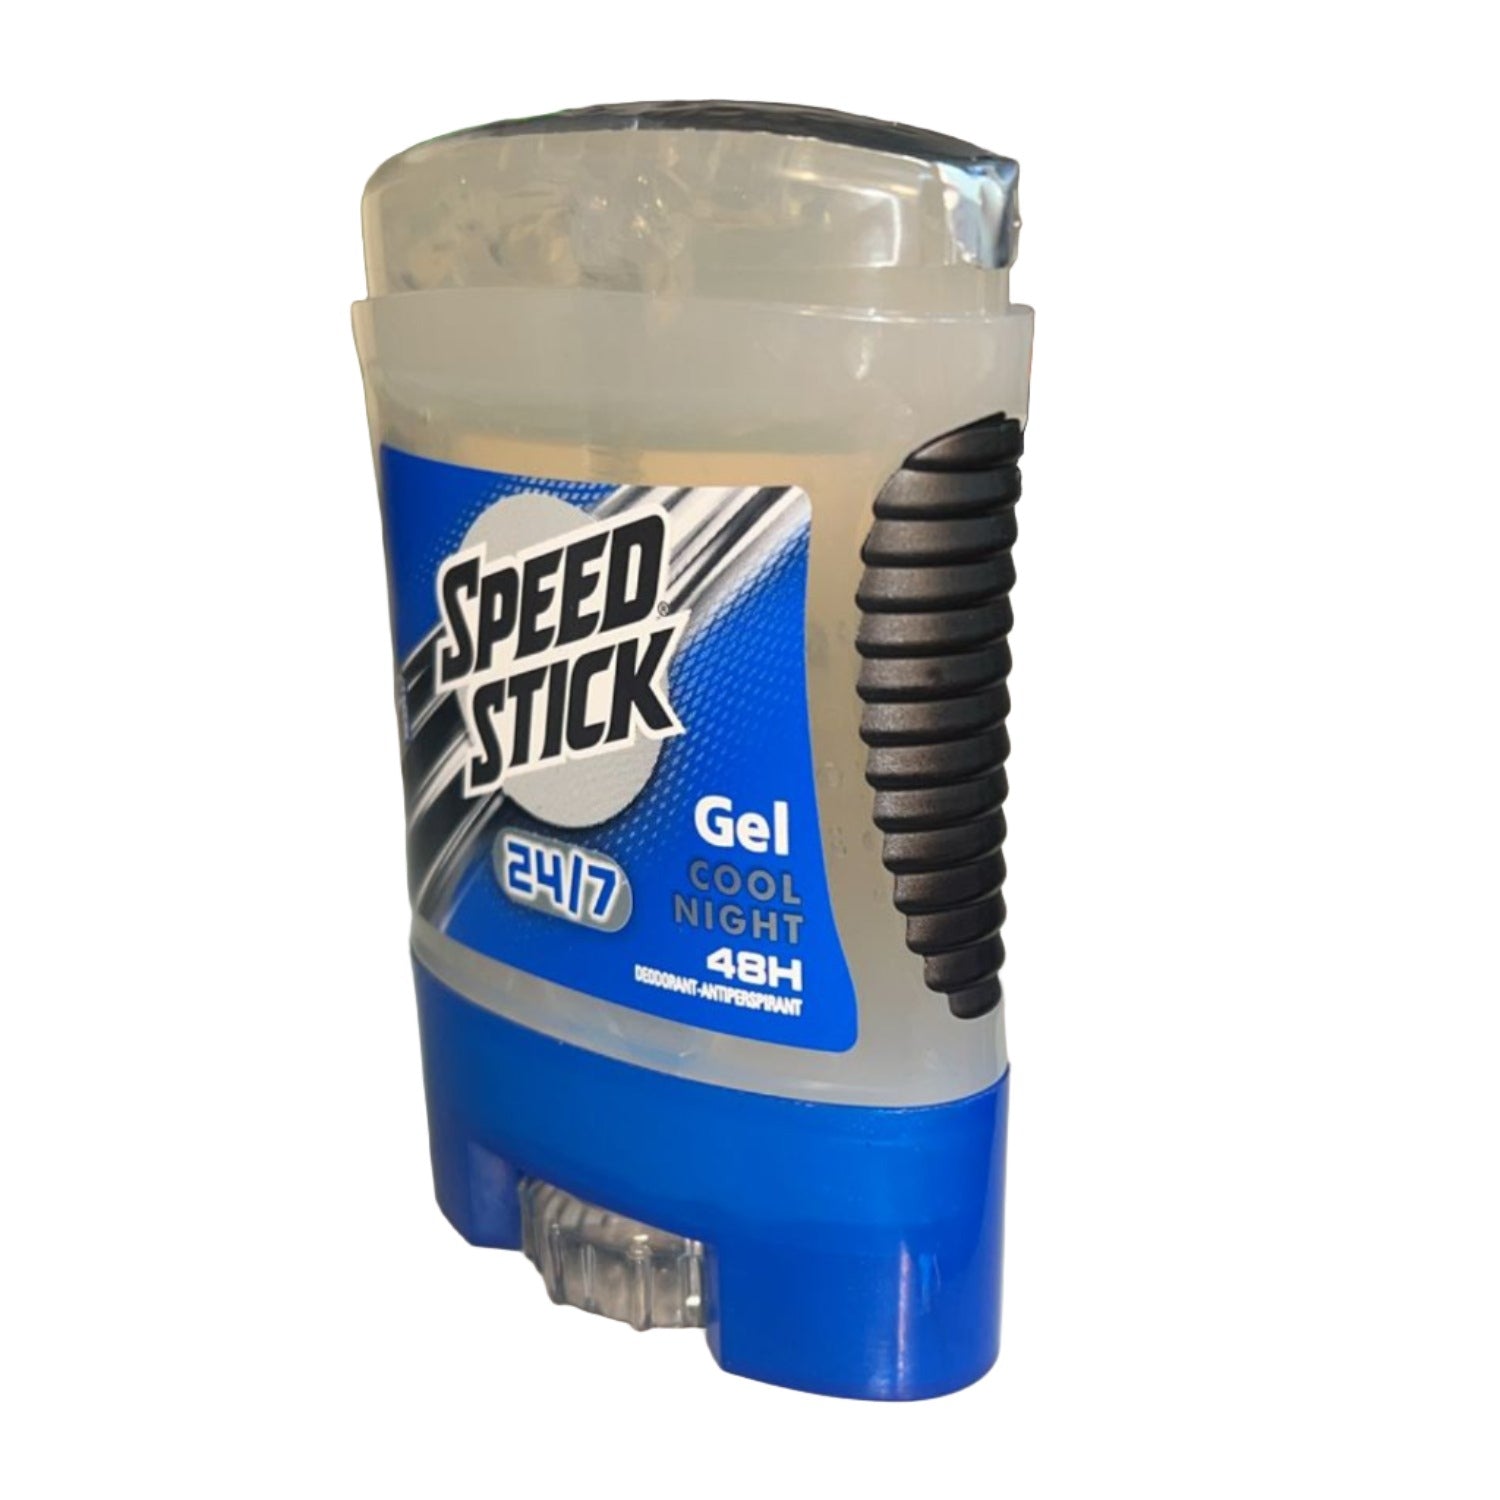 Speed Stick 24/7 Cool Night 85g Gel - Stay Fresh and Dry